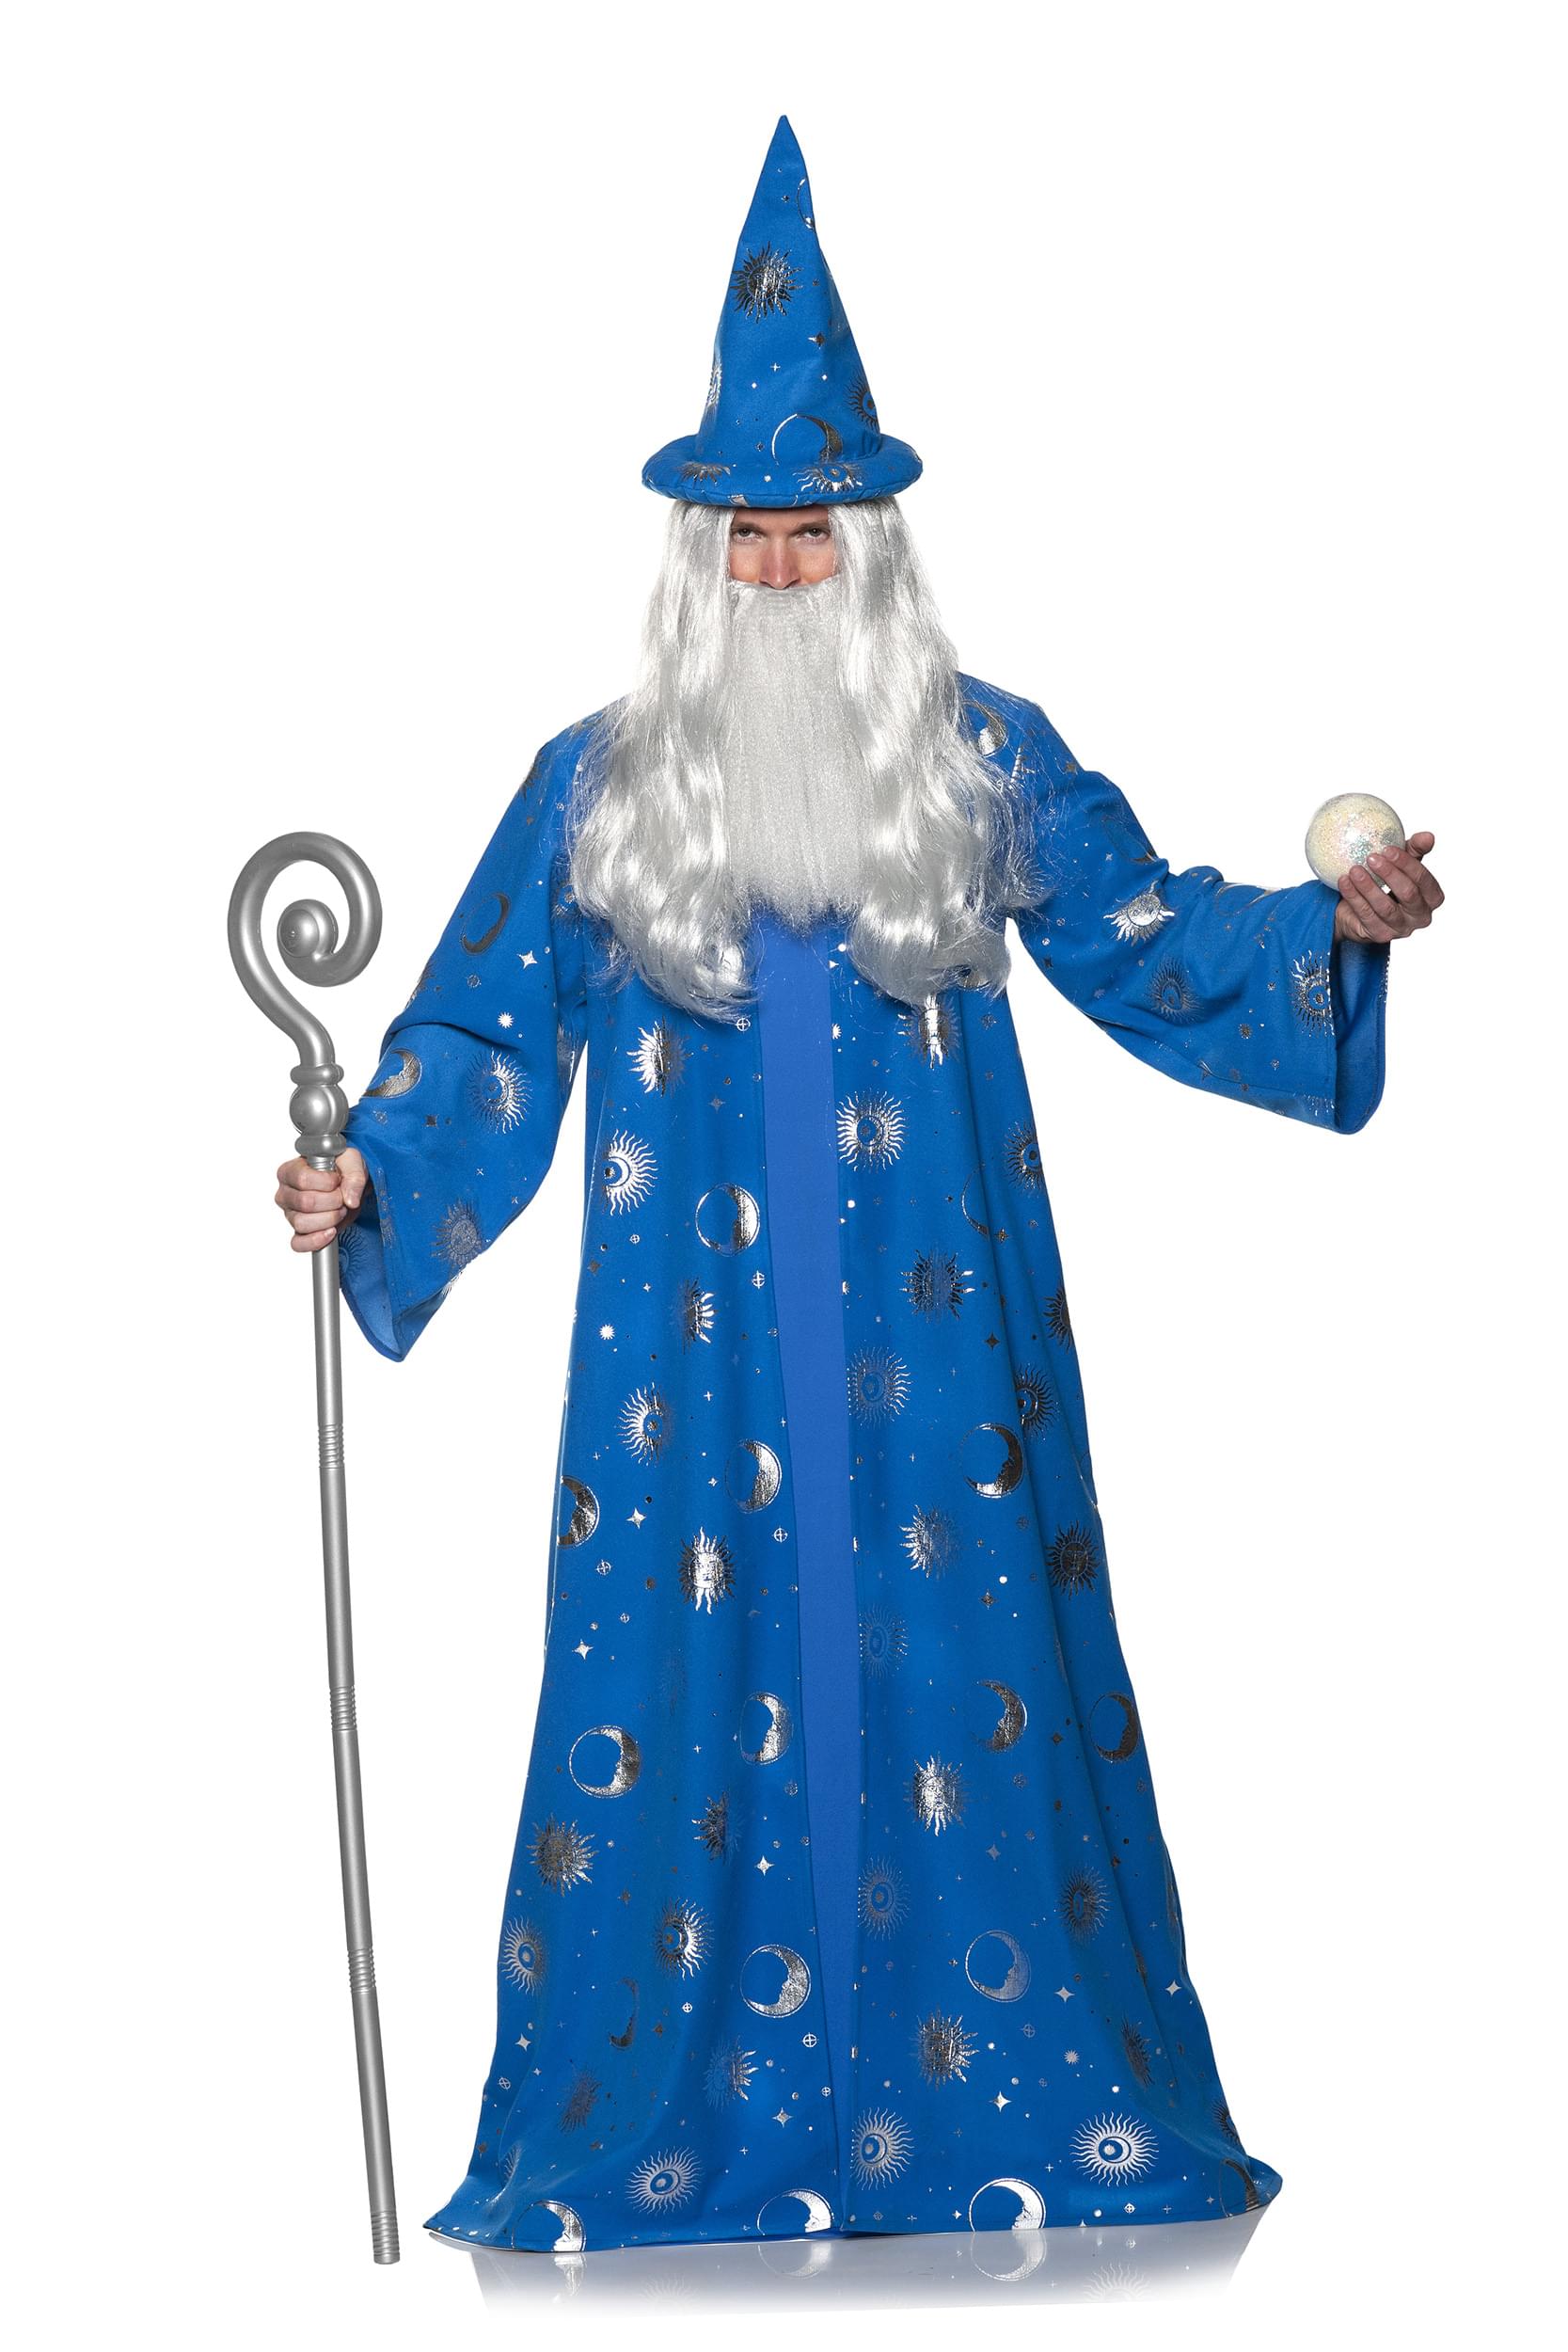 Celestial Wizard Robe -Blue Adult Costume